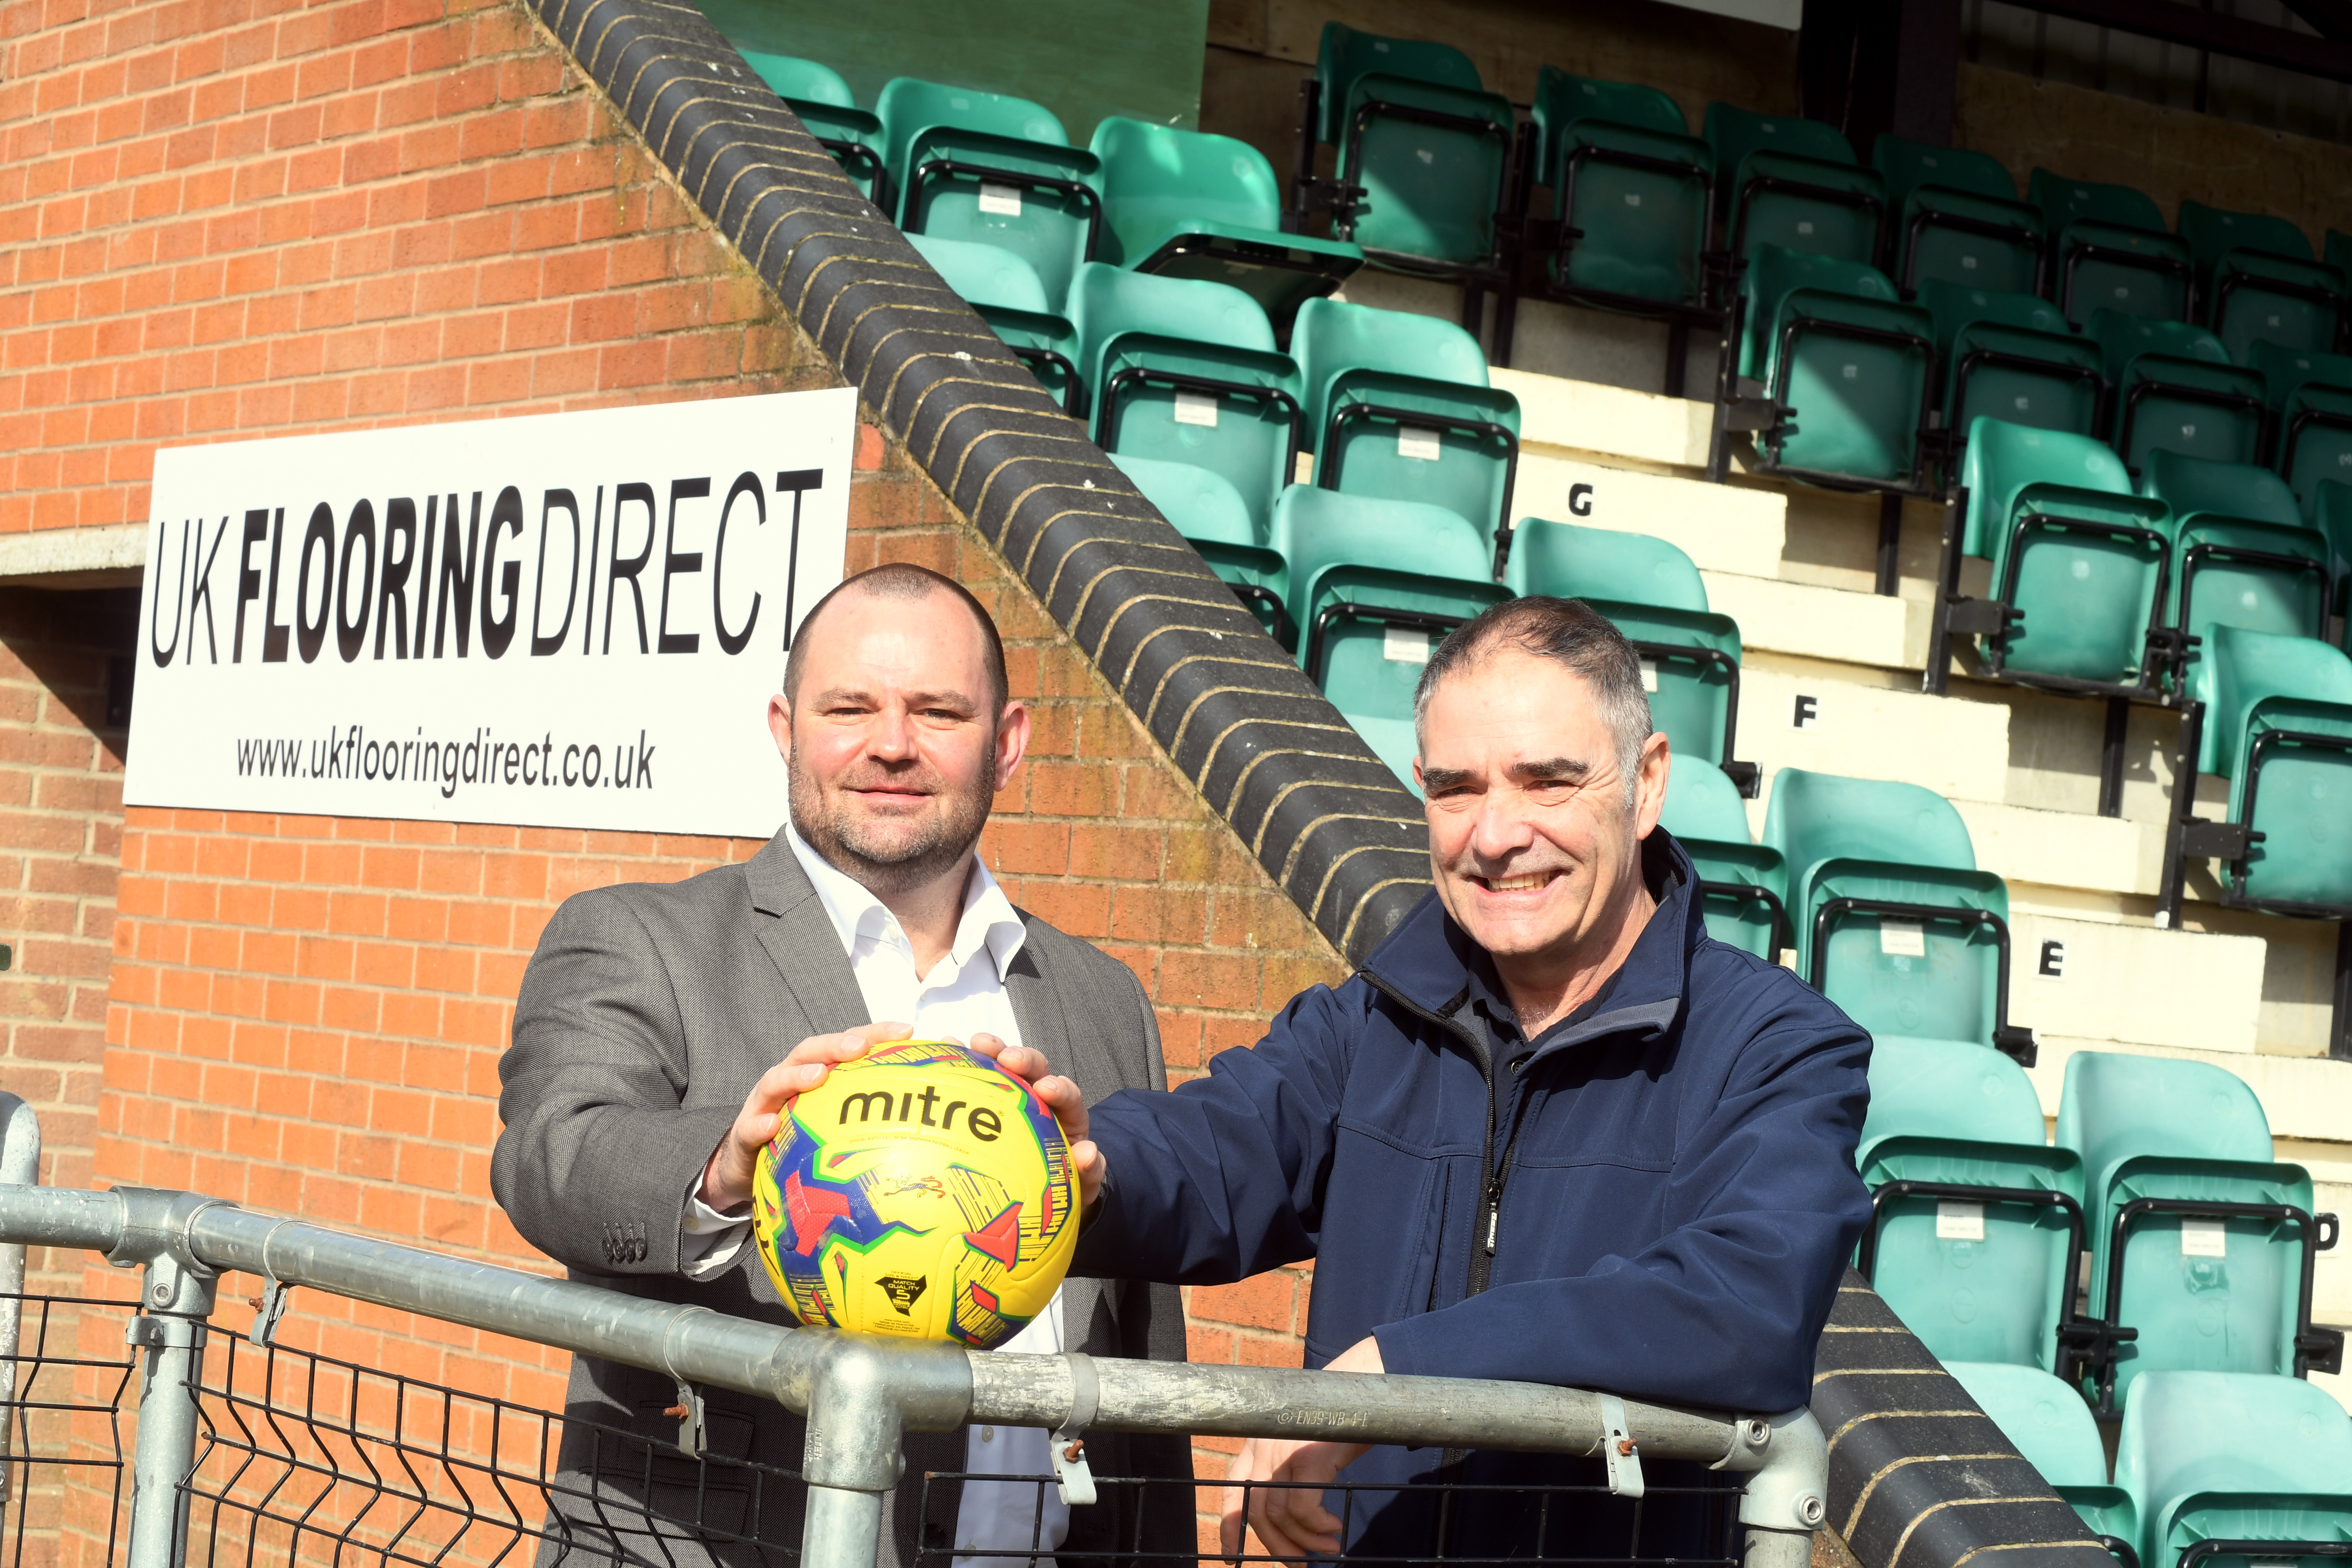 Uk Flooring Direct Agrees Three Year Sponsorship Deal With Football Club